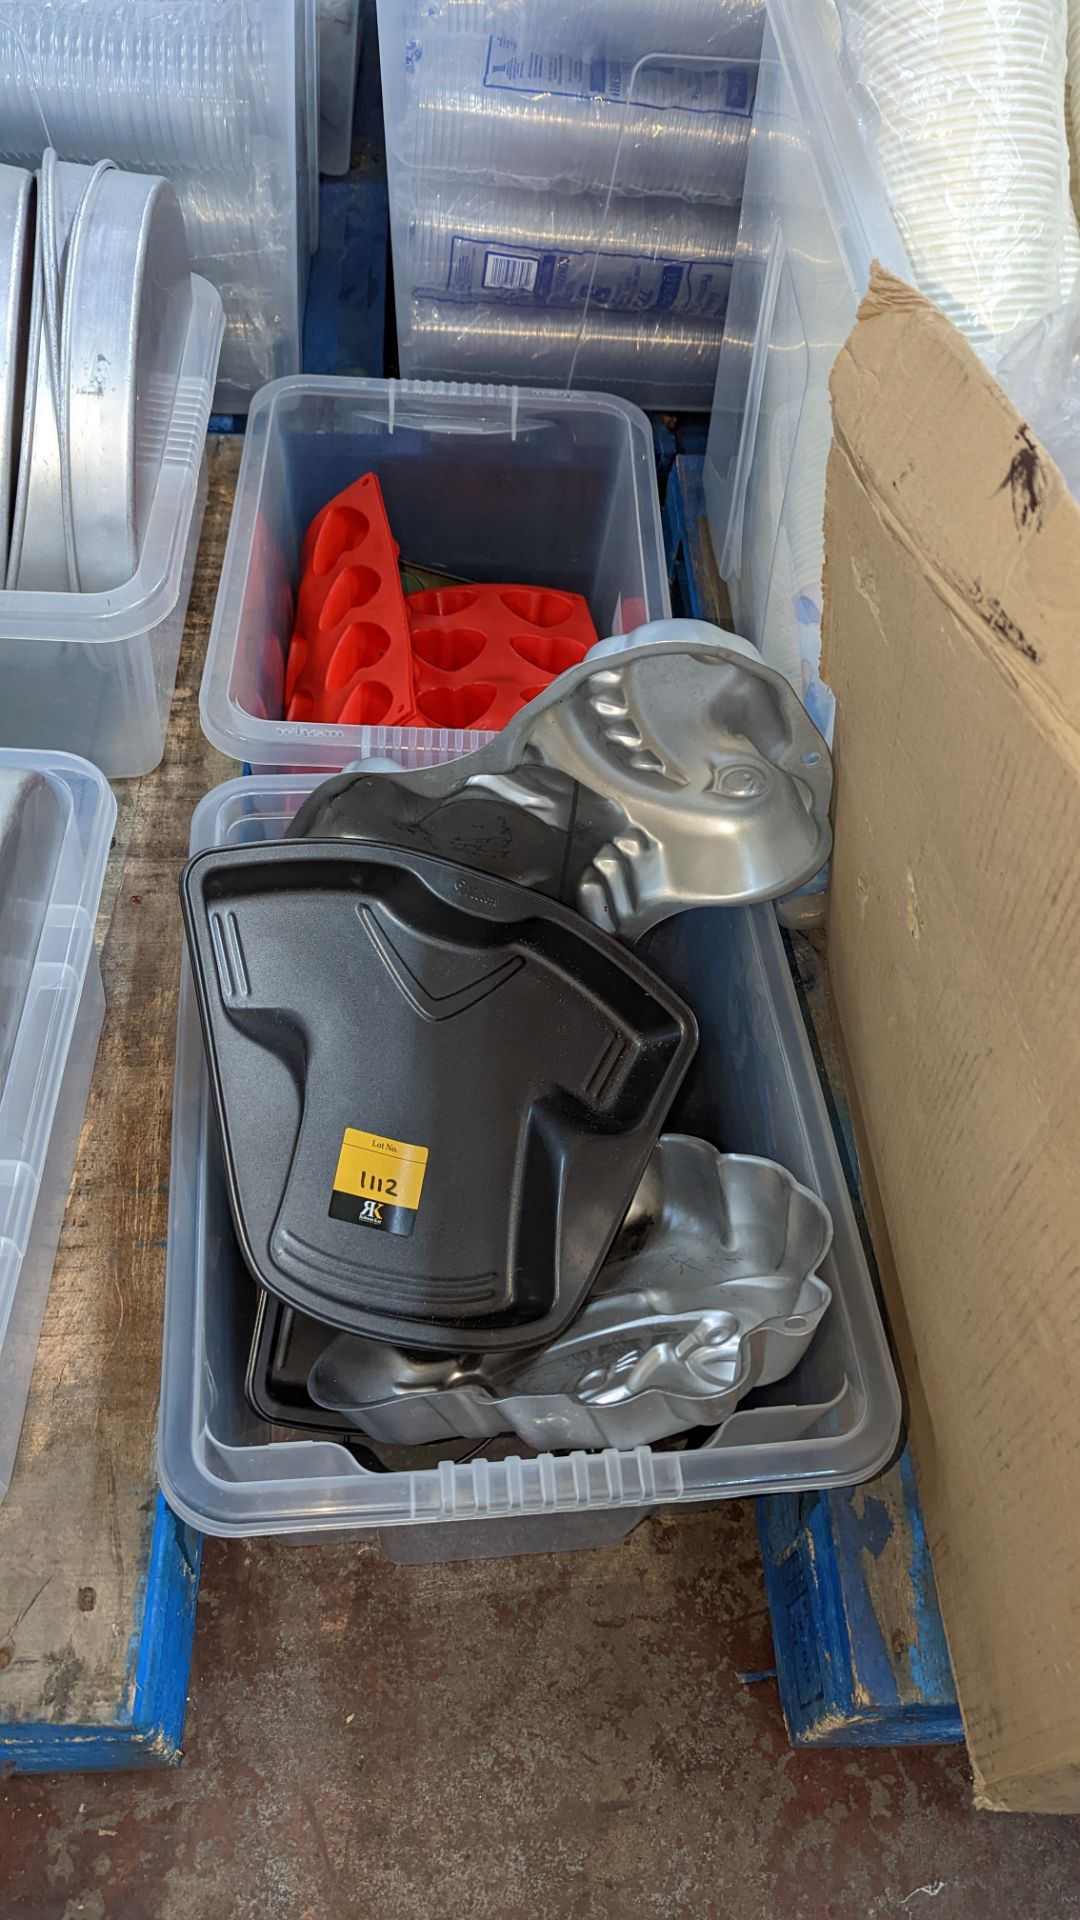 Contents of a crate of large novelty cake moulds in a style of sports shirts, unicorn, heart, dinosa